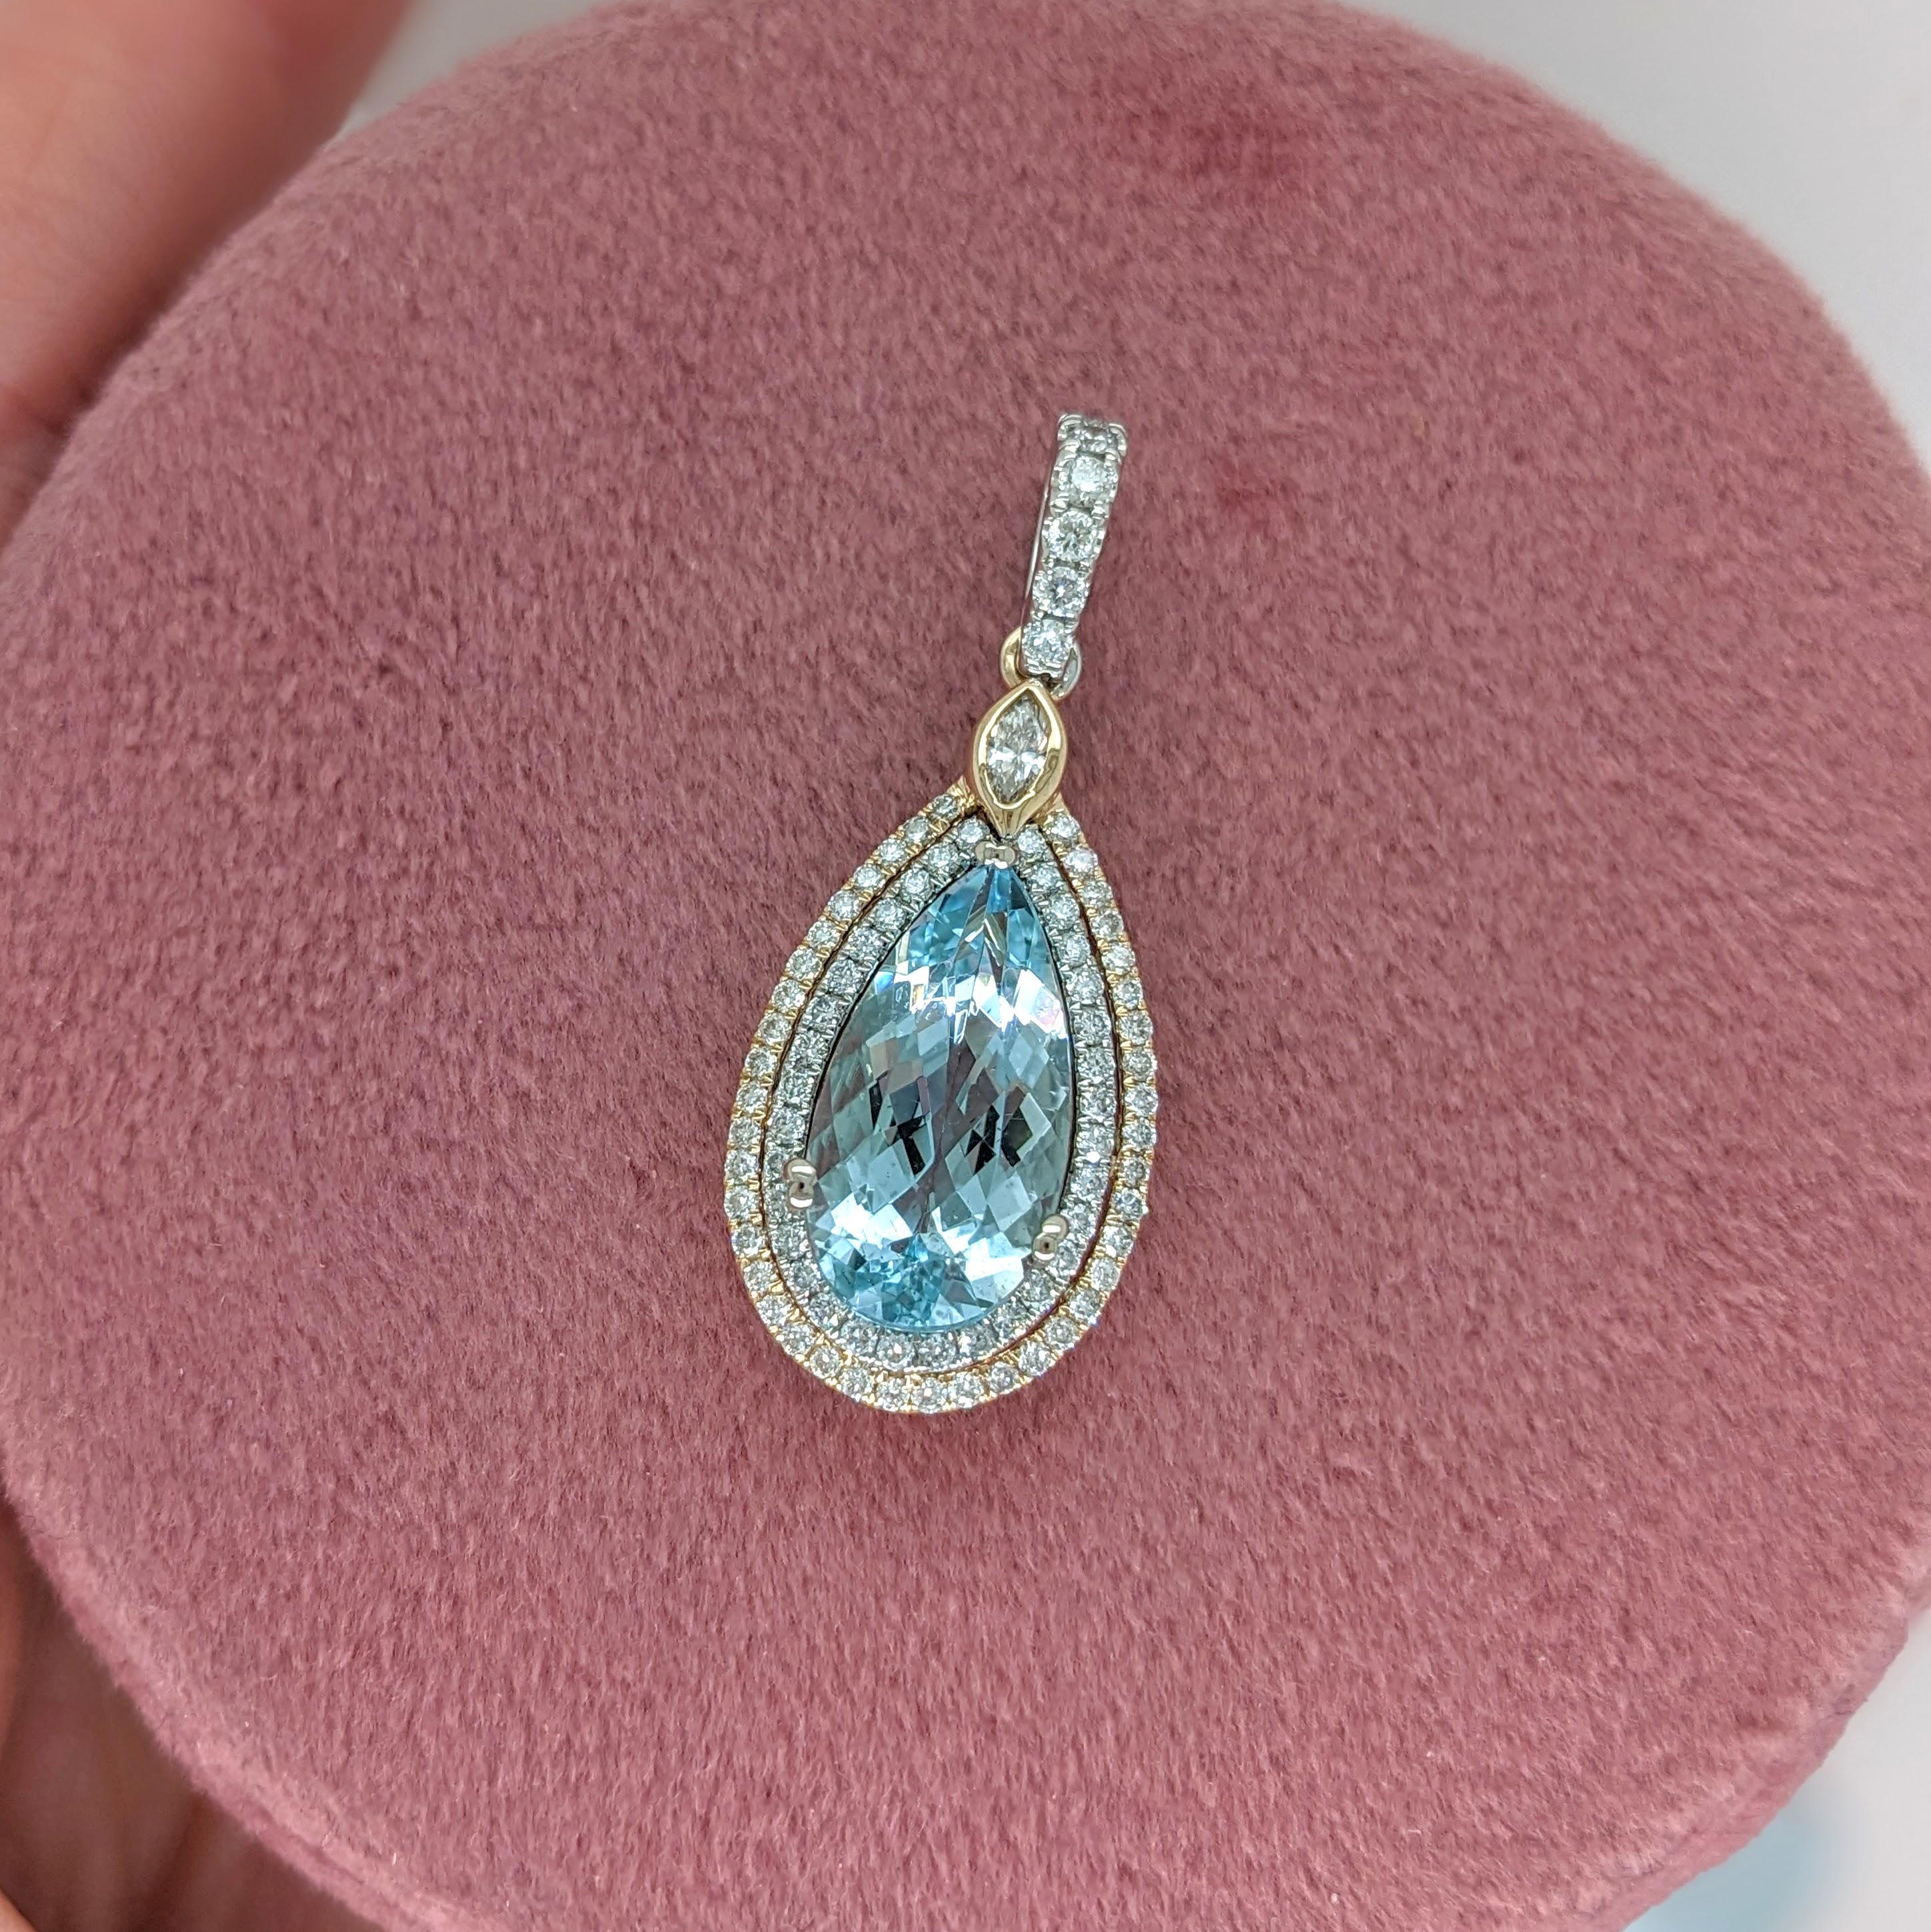 This unique pendant features a 3.13 carat pear shape aquamarine gemstone with natural earth mined diamonds, all set in solid 14K dual tone gold - yellow + white gold.  This pendant can be a beautiful March birthstone gift for your loved ones!